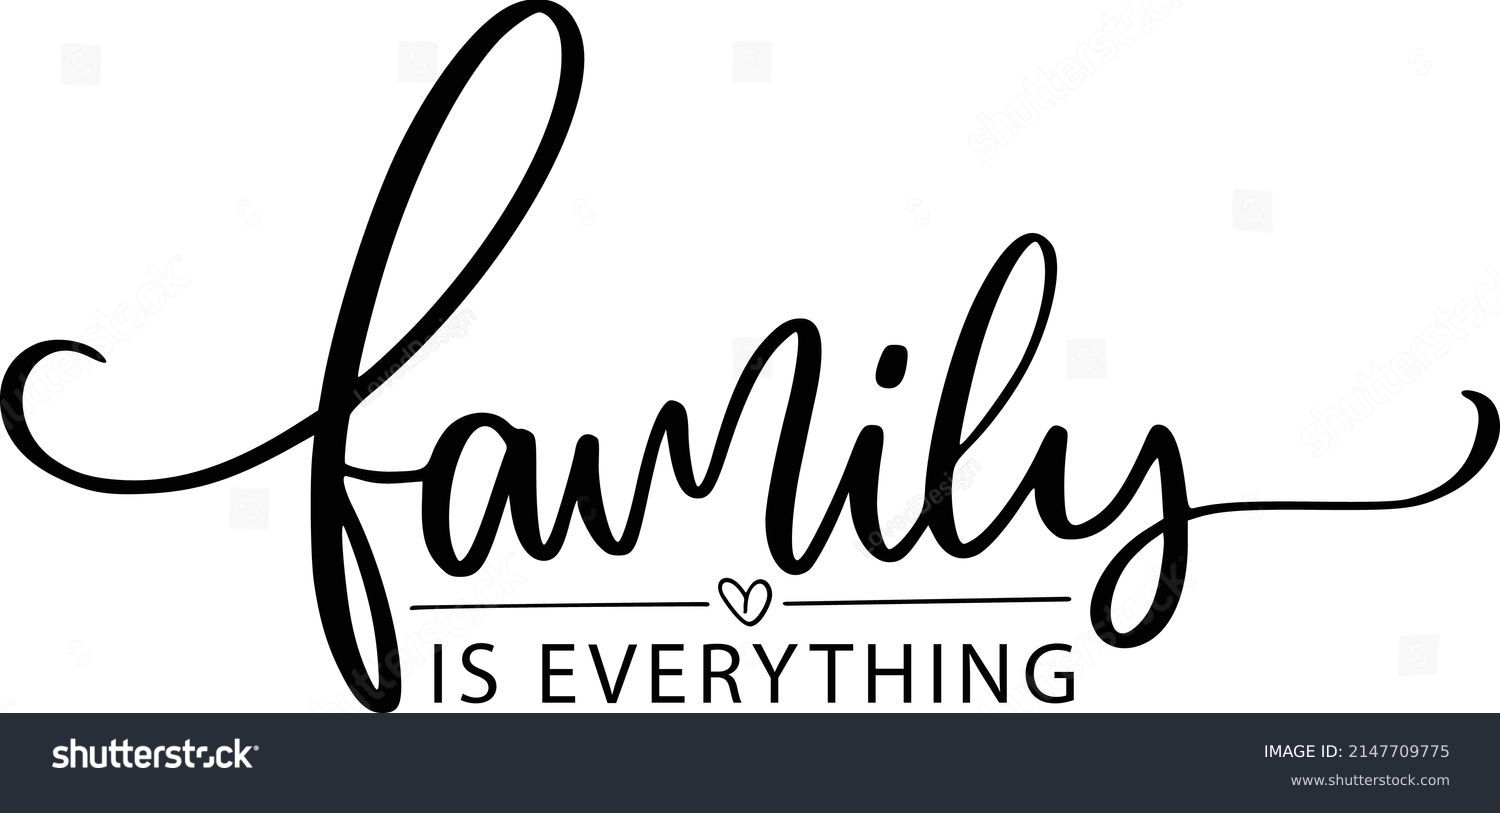 SVG of Family Is Everything Quotes. Doormat Lettering Quotes For Printable Poster, Tote Bag, Mugs, T-Shirt Design.
 svg